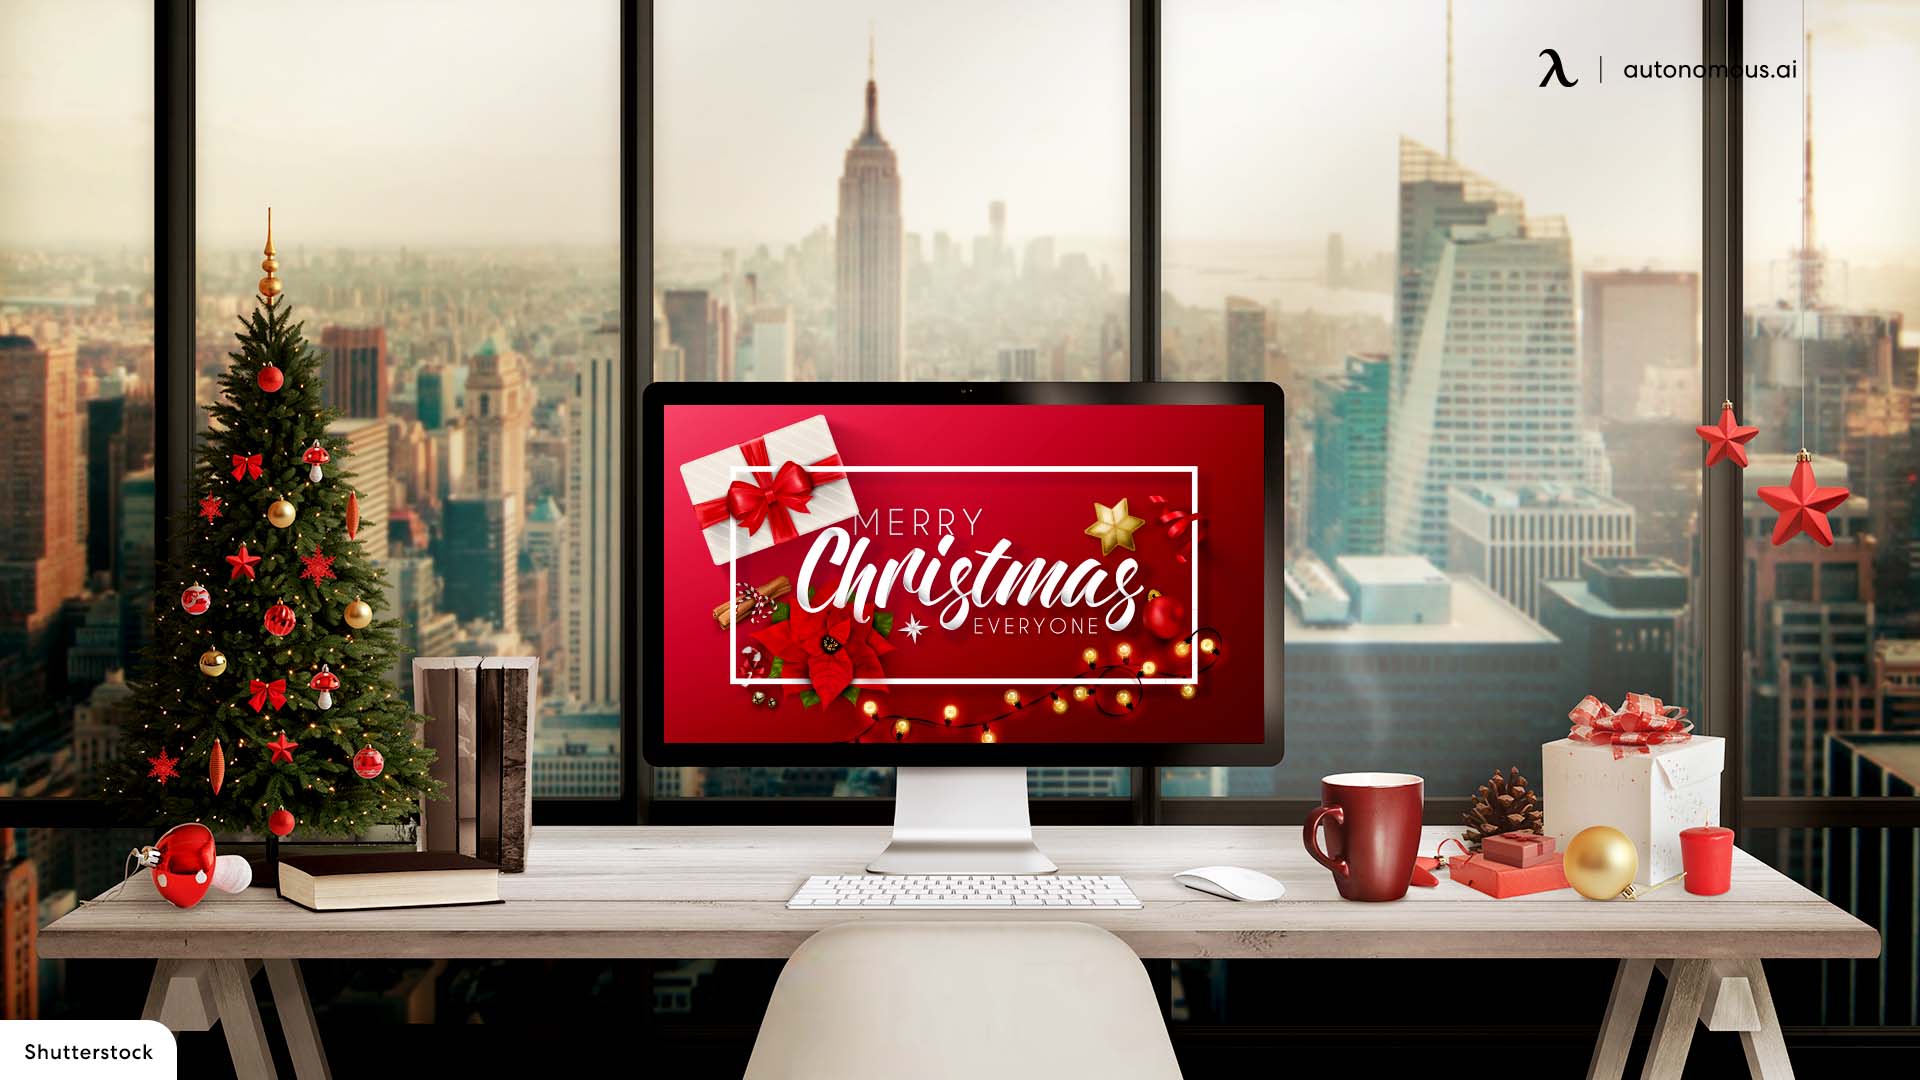 15 Affordable Christmas Desk Decorations for Your Working Corner